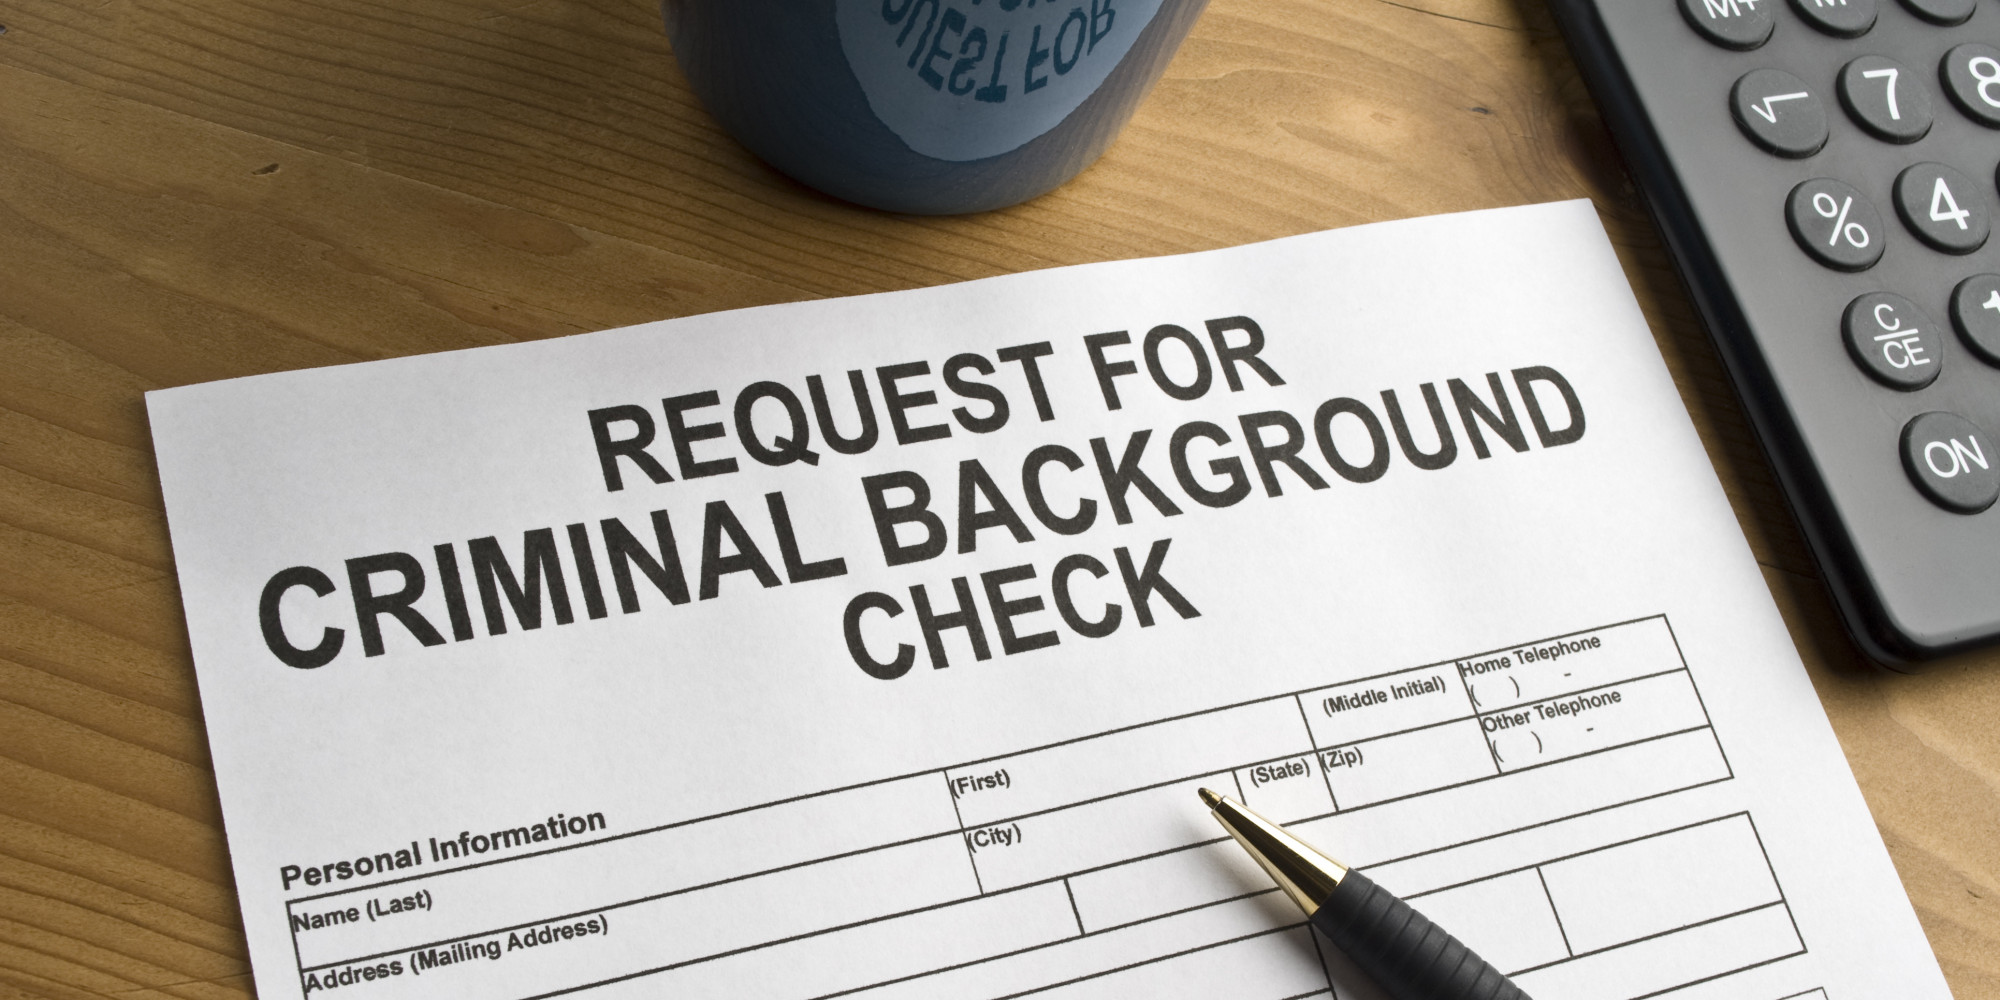 Database & <br> Background check removal